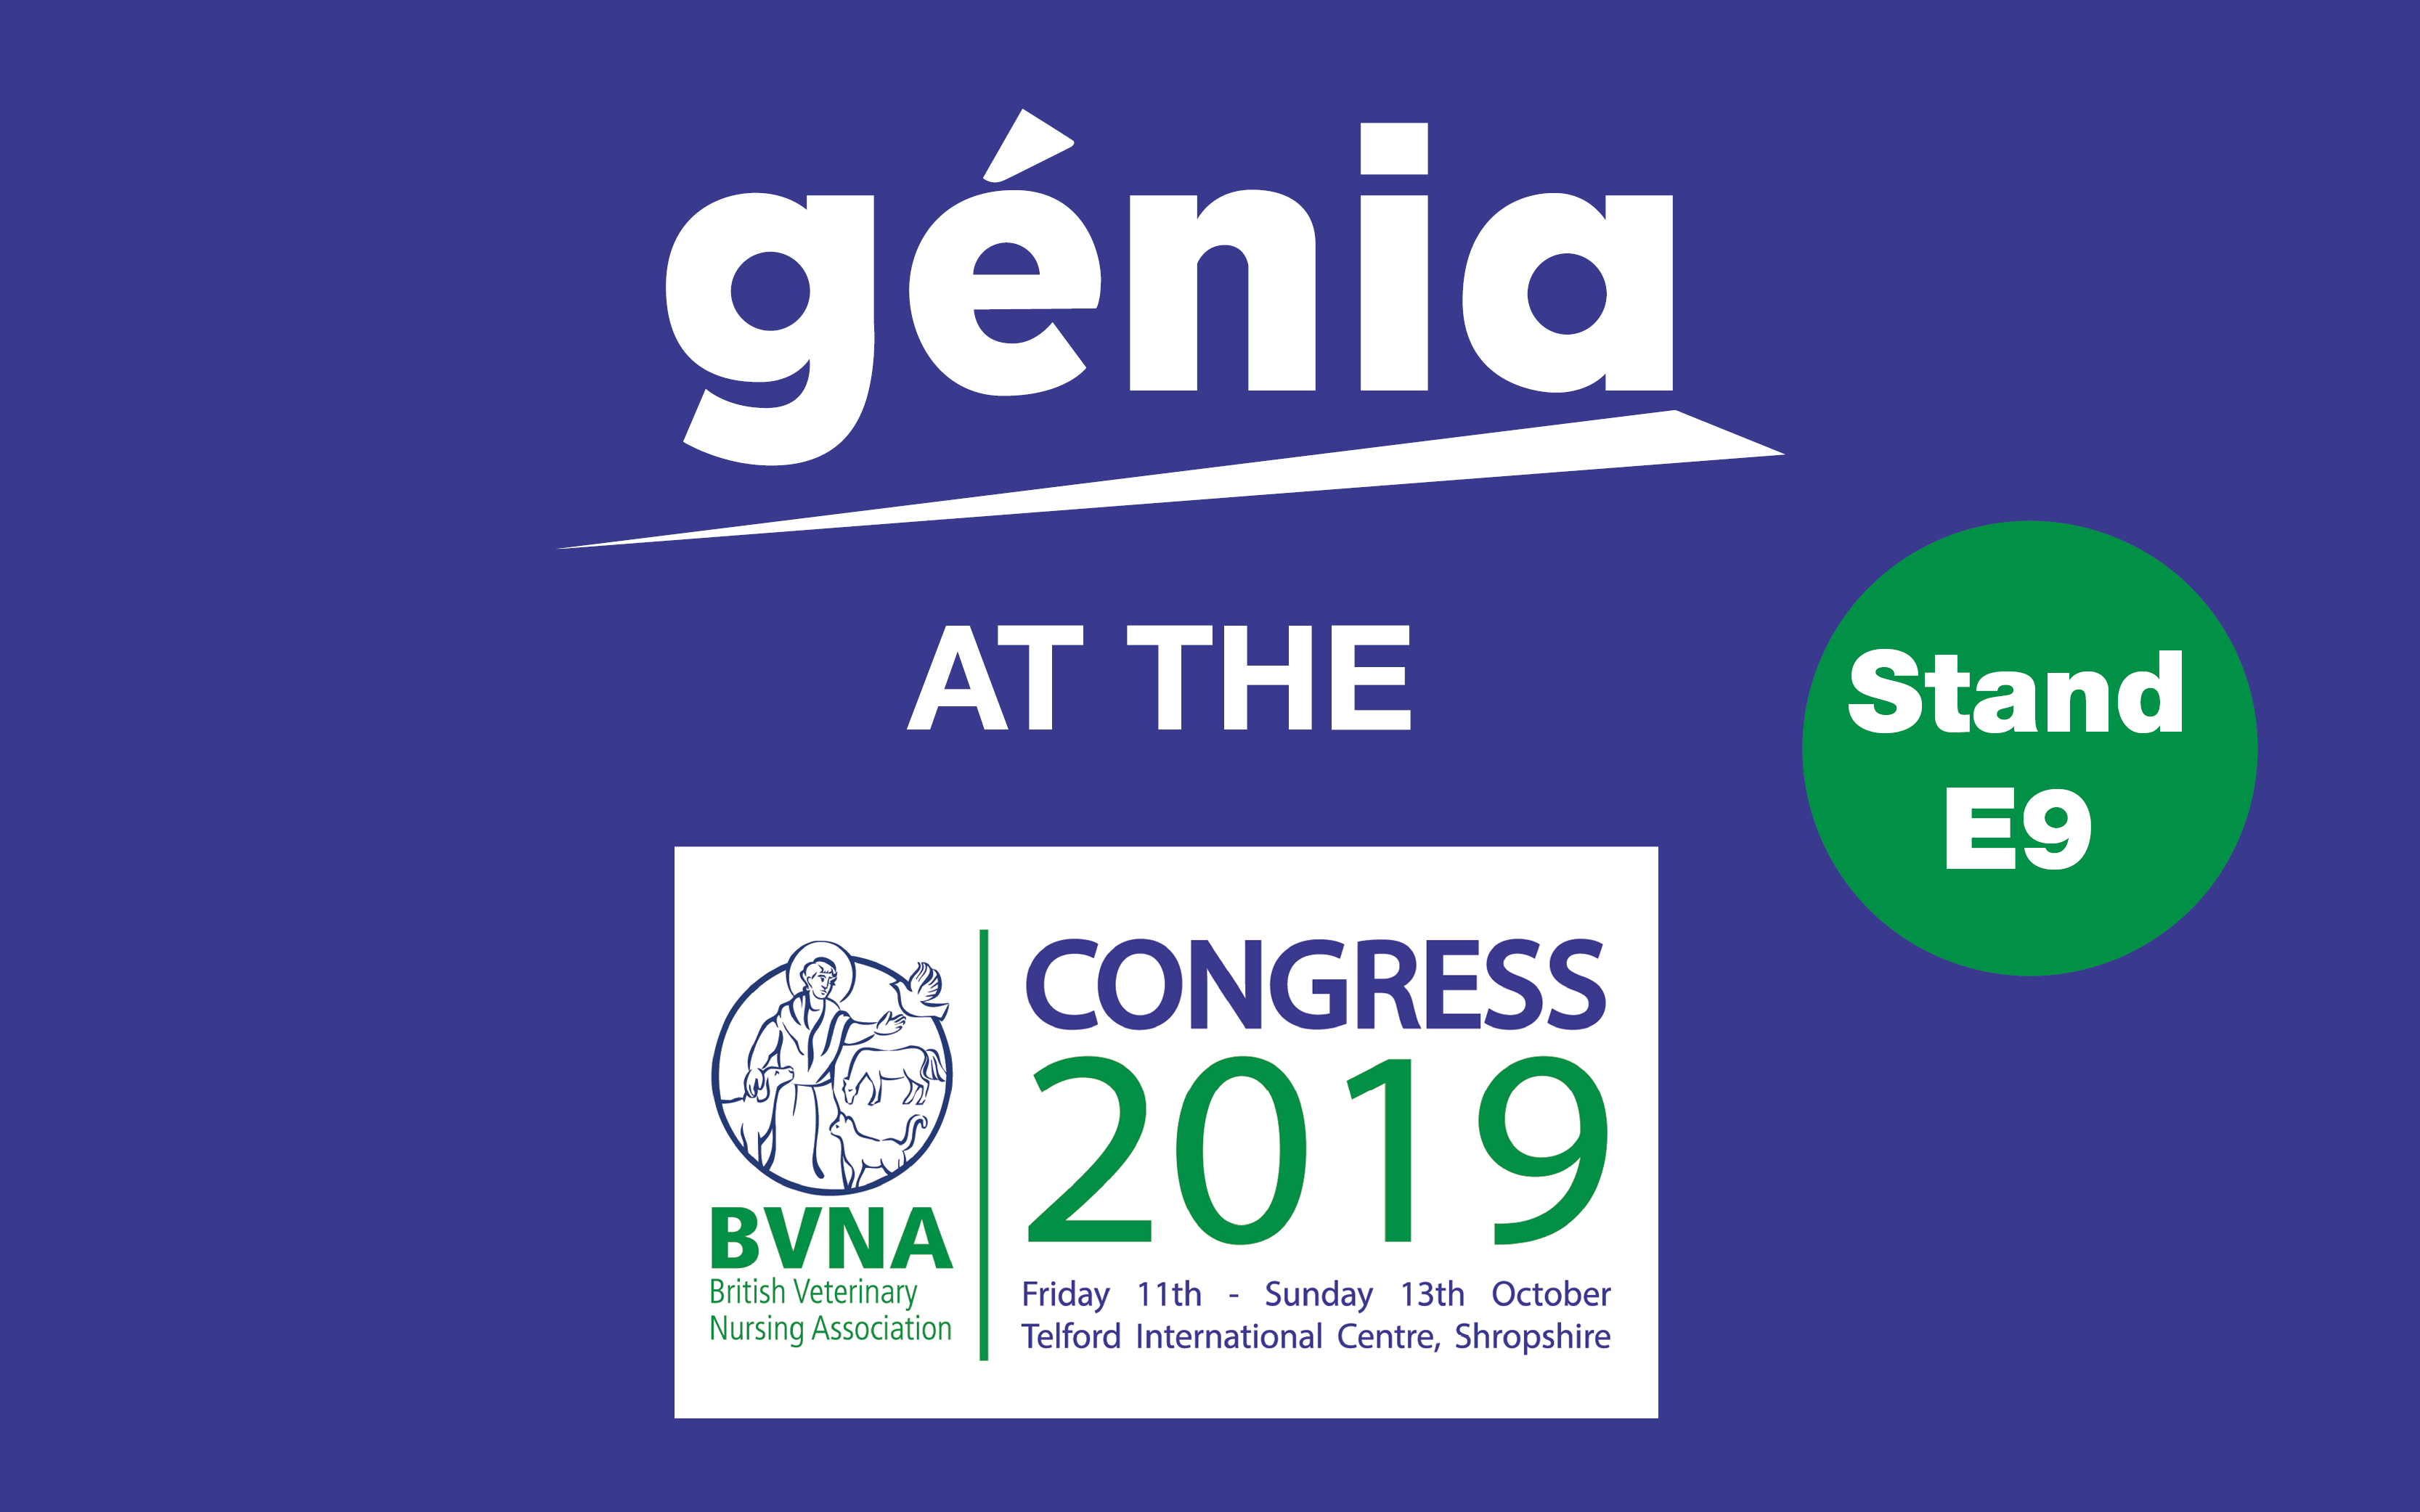 Genia will be present on the BVNA !